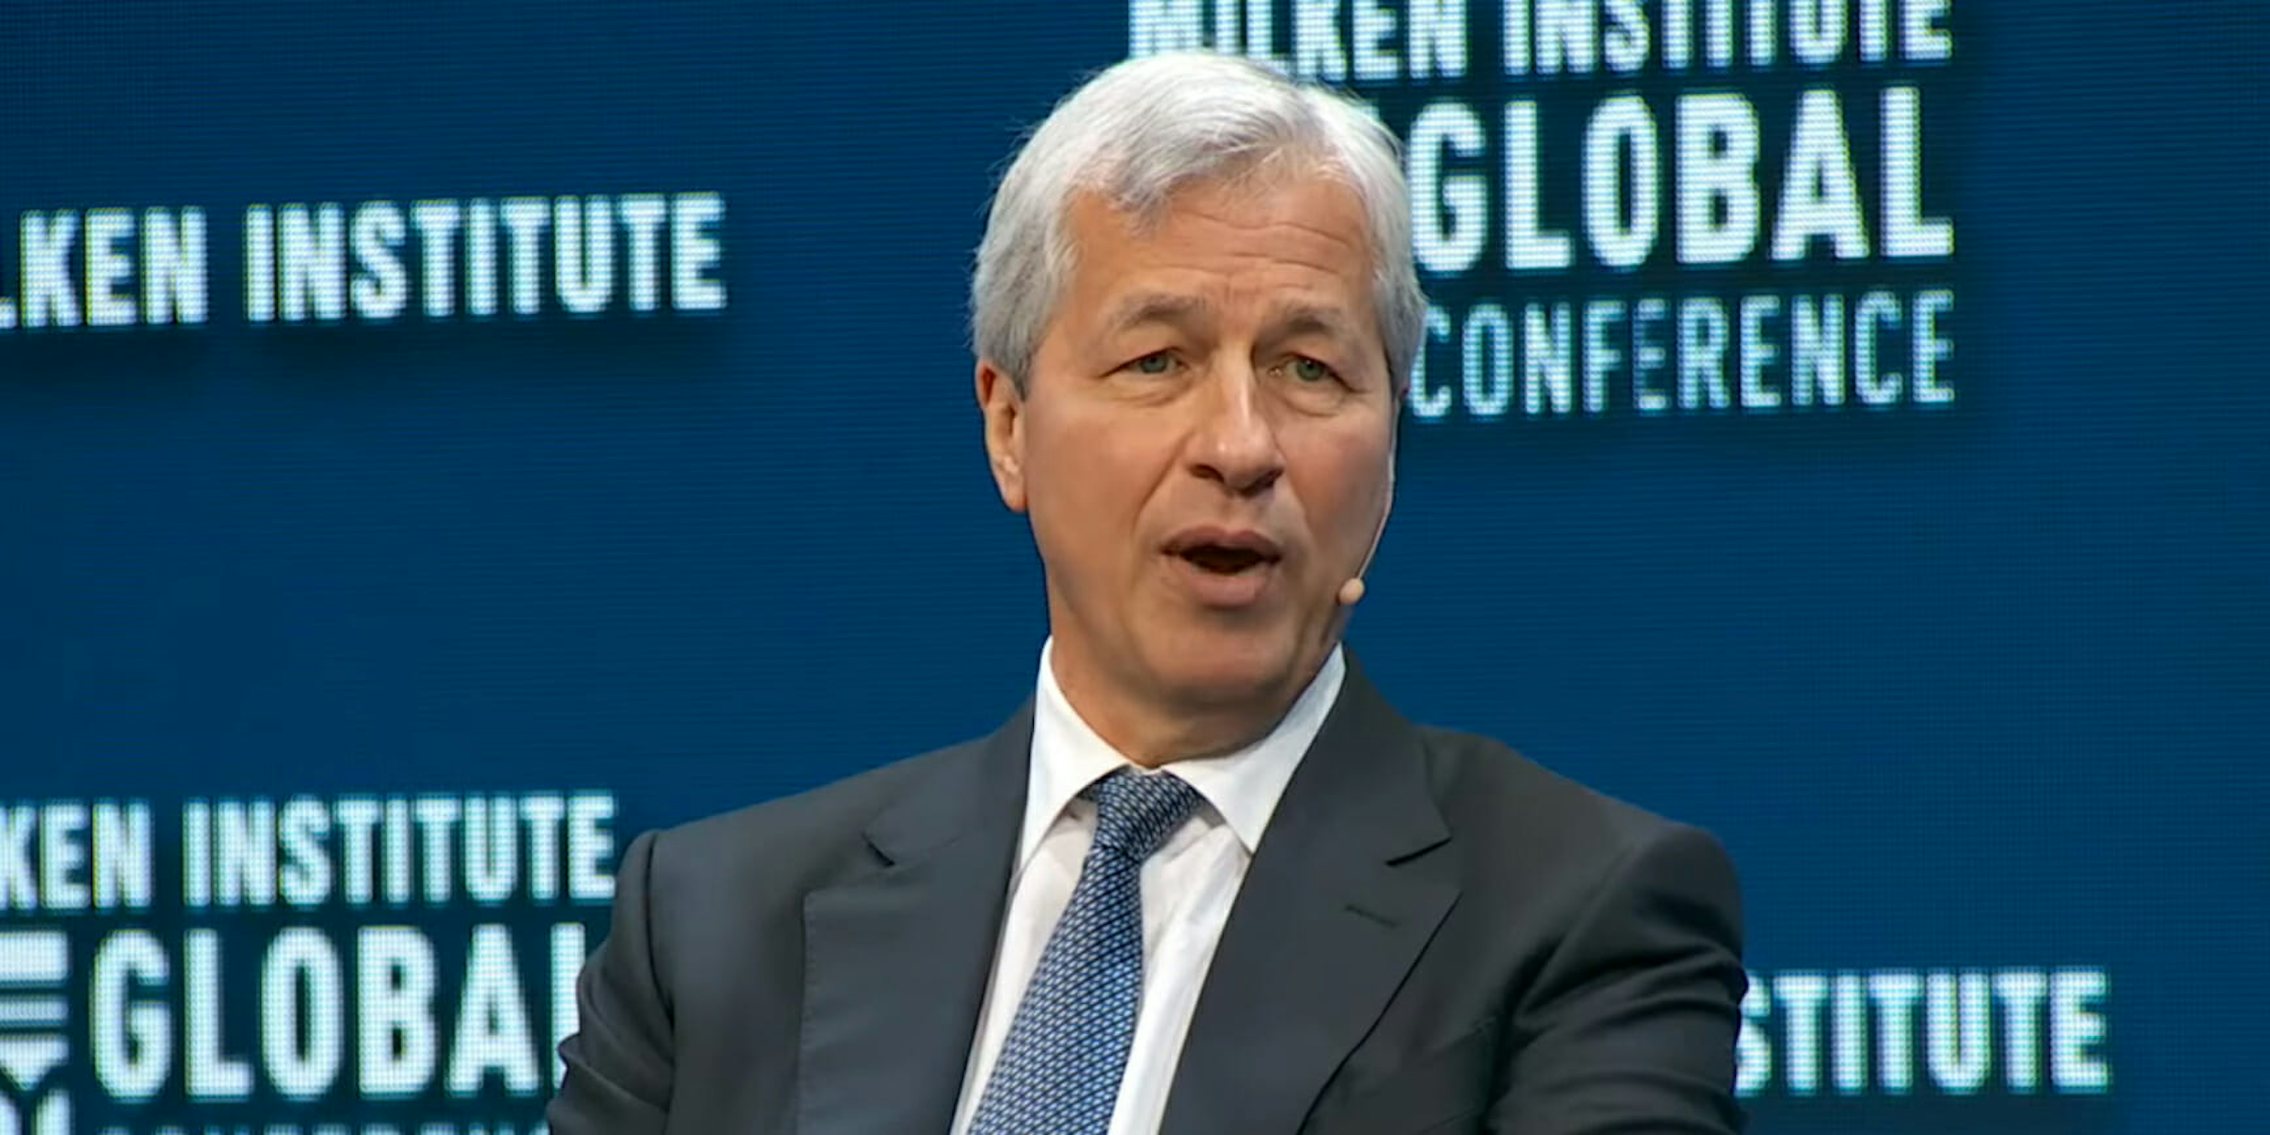 JPMorgan Chase CEO Jamie Dimon seemed to think he'd have a good chance at defeating President Donald Trump in a hypothetical presidential race–but had some second thoughts about his prediction shortly after making it.